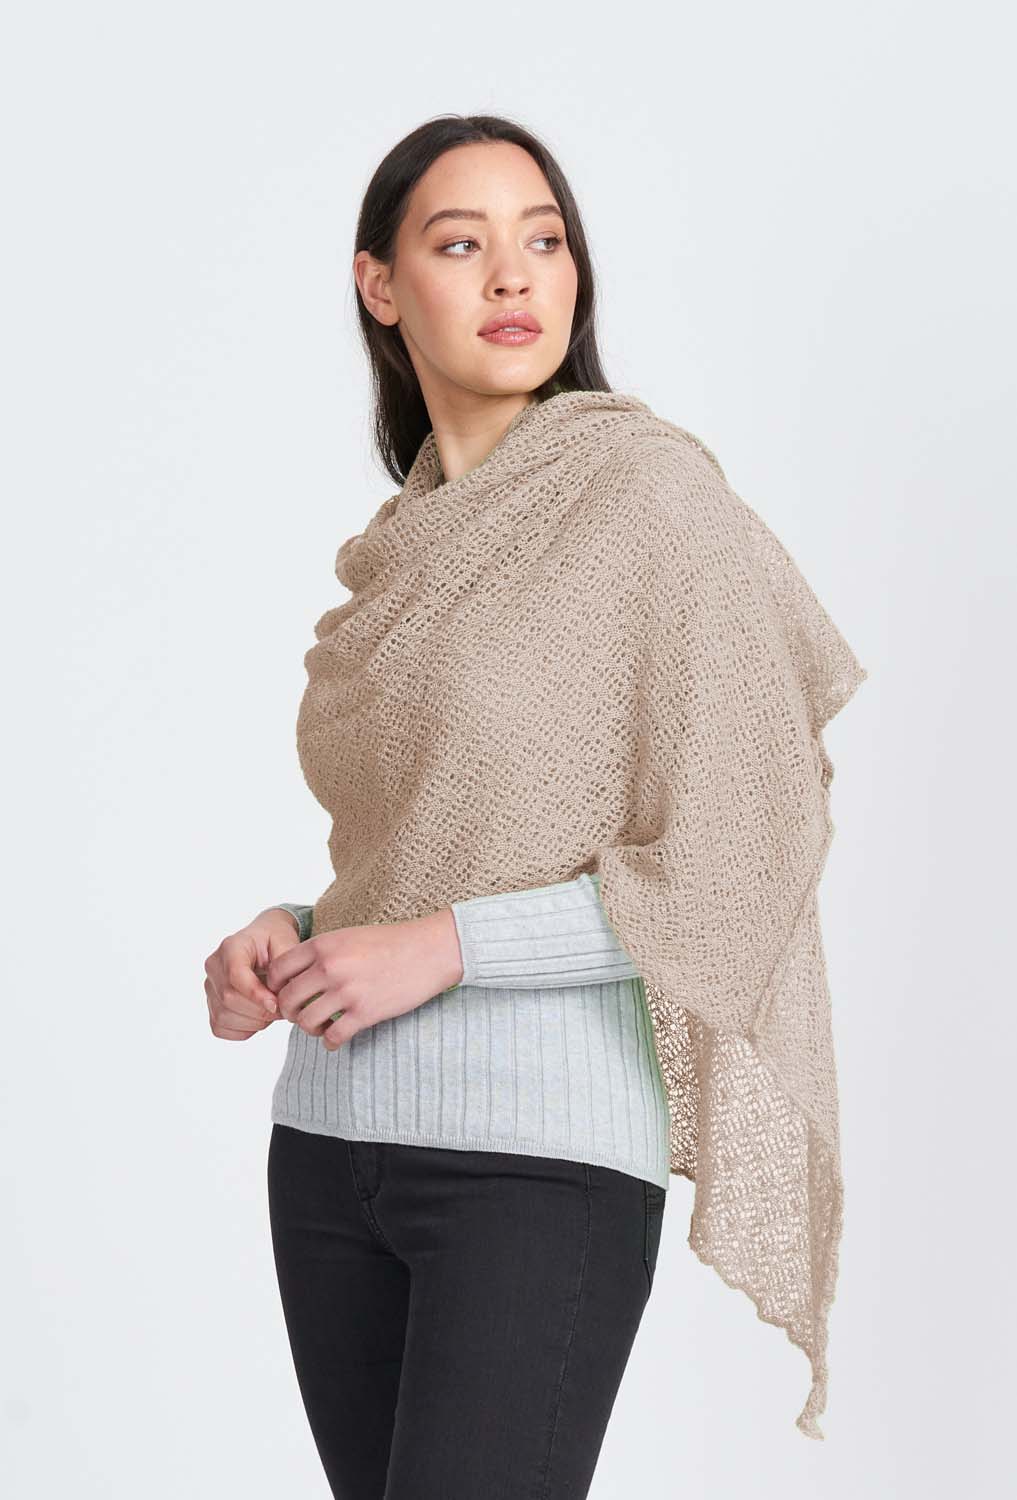 Lace Wrap in Light Camel by Royal Merino